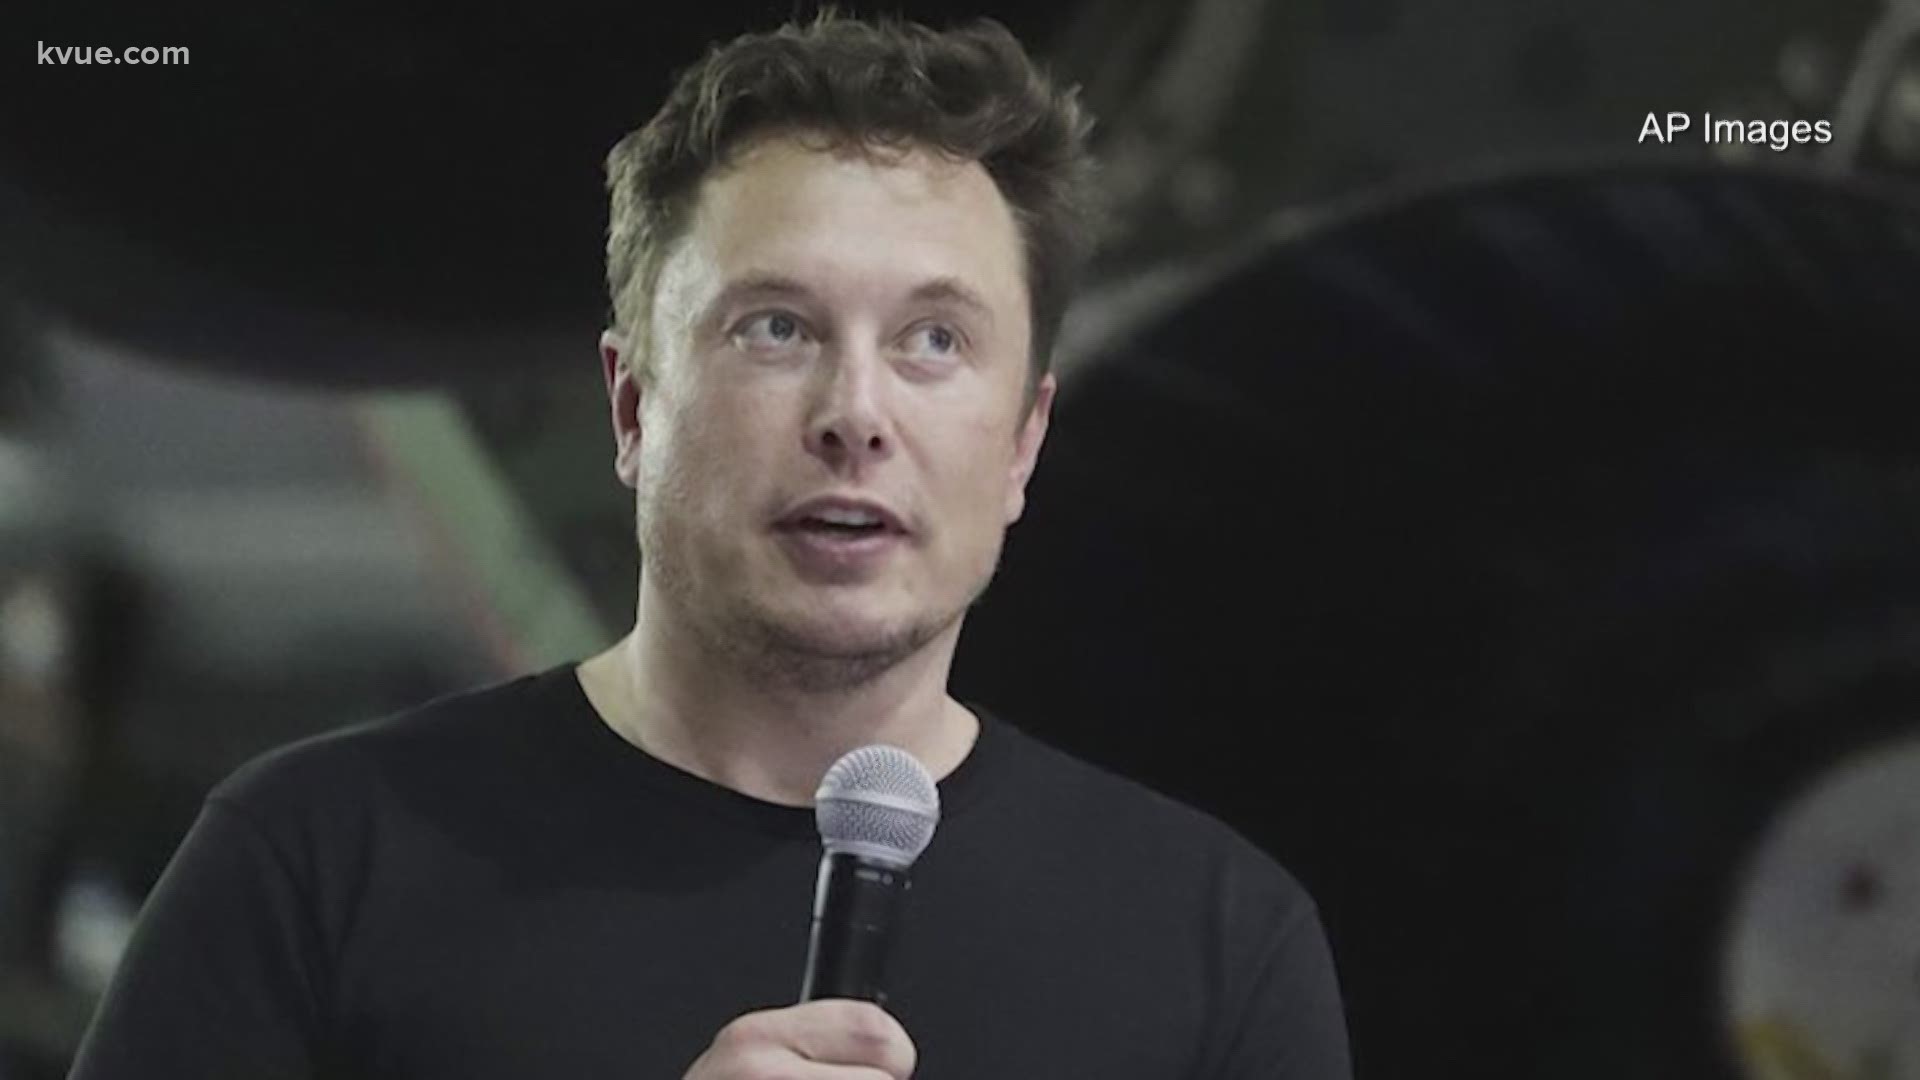 An Austin business organization says it can't wait to see what Tesla and Elon Musk bring to Texas. Musk recently confirmed he has moved to the Lone Star State.